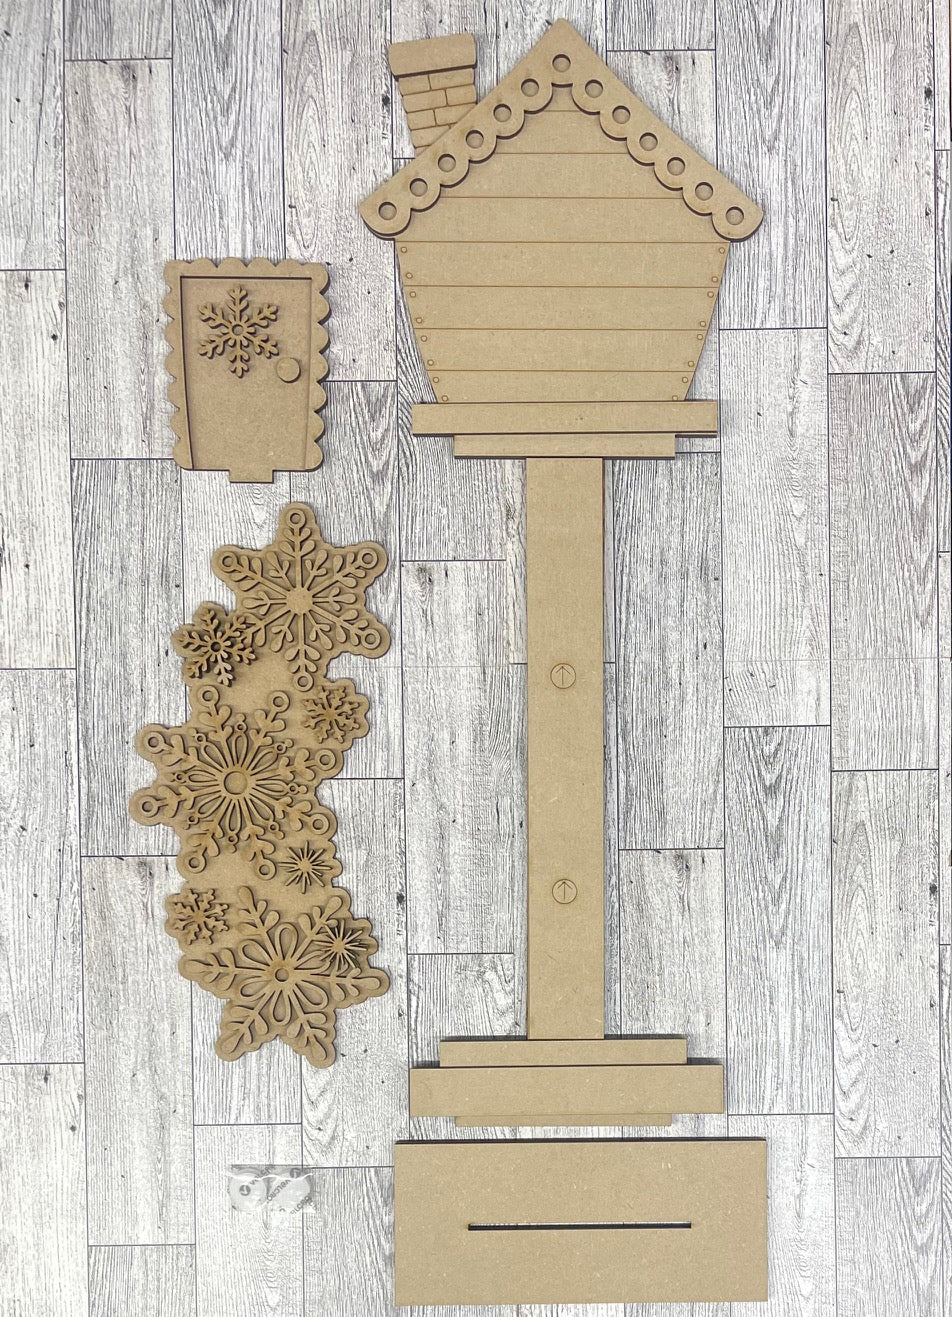 Snowflake Winter Birdhouse changeable standing kit only - wood pieces, unpainted wood cutouts, ready for you to paint, sign backer is not included